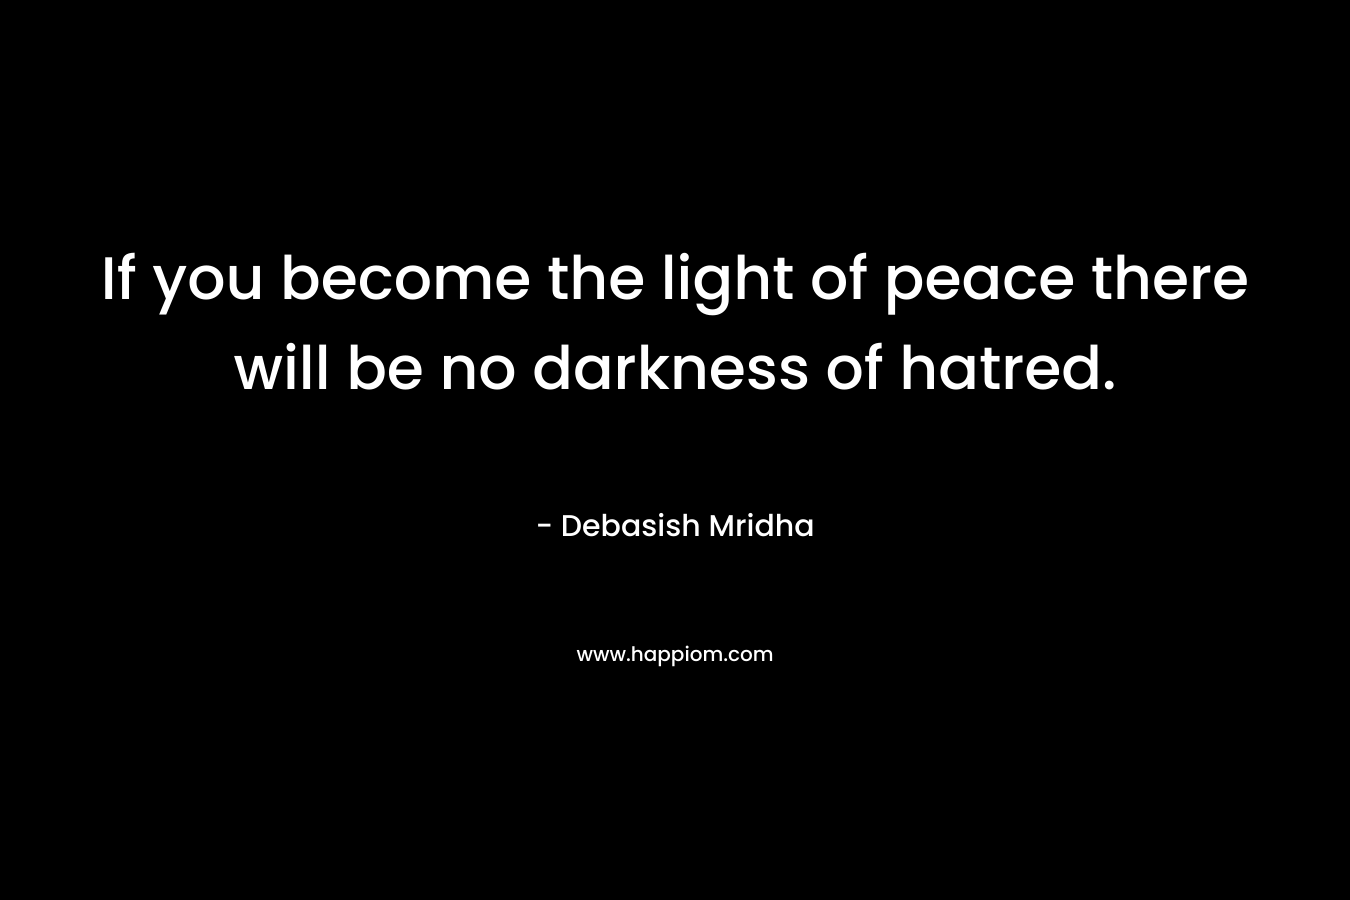 If you become the light of peace there will be no darkness of hatred.